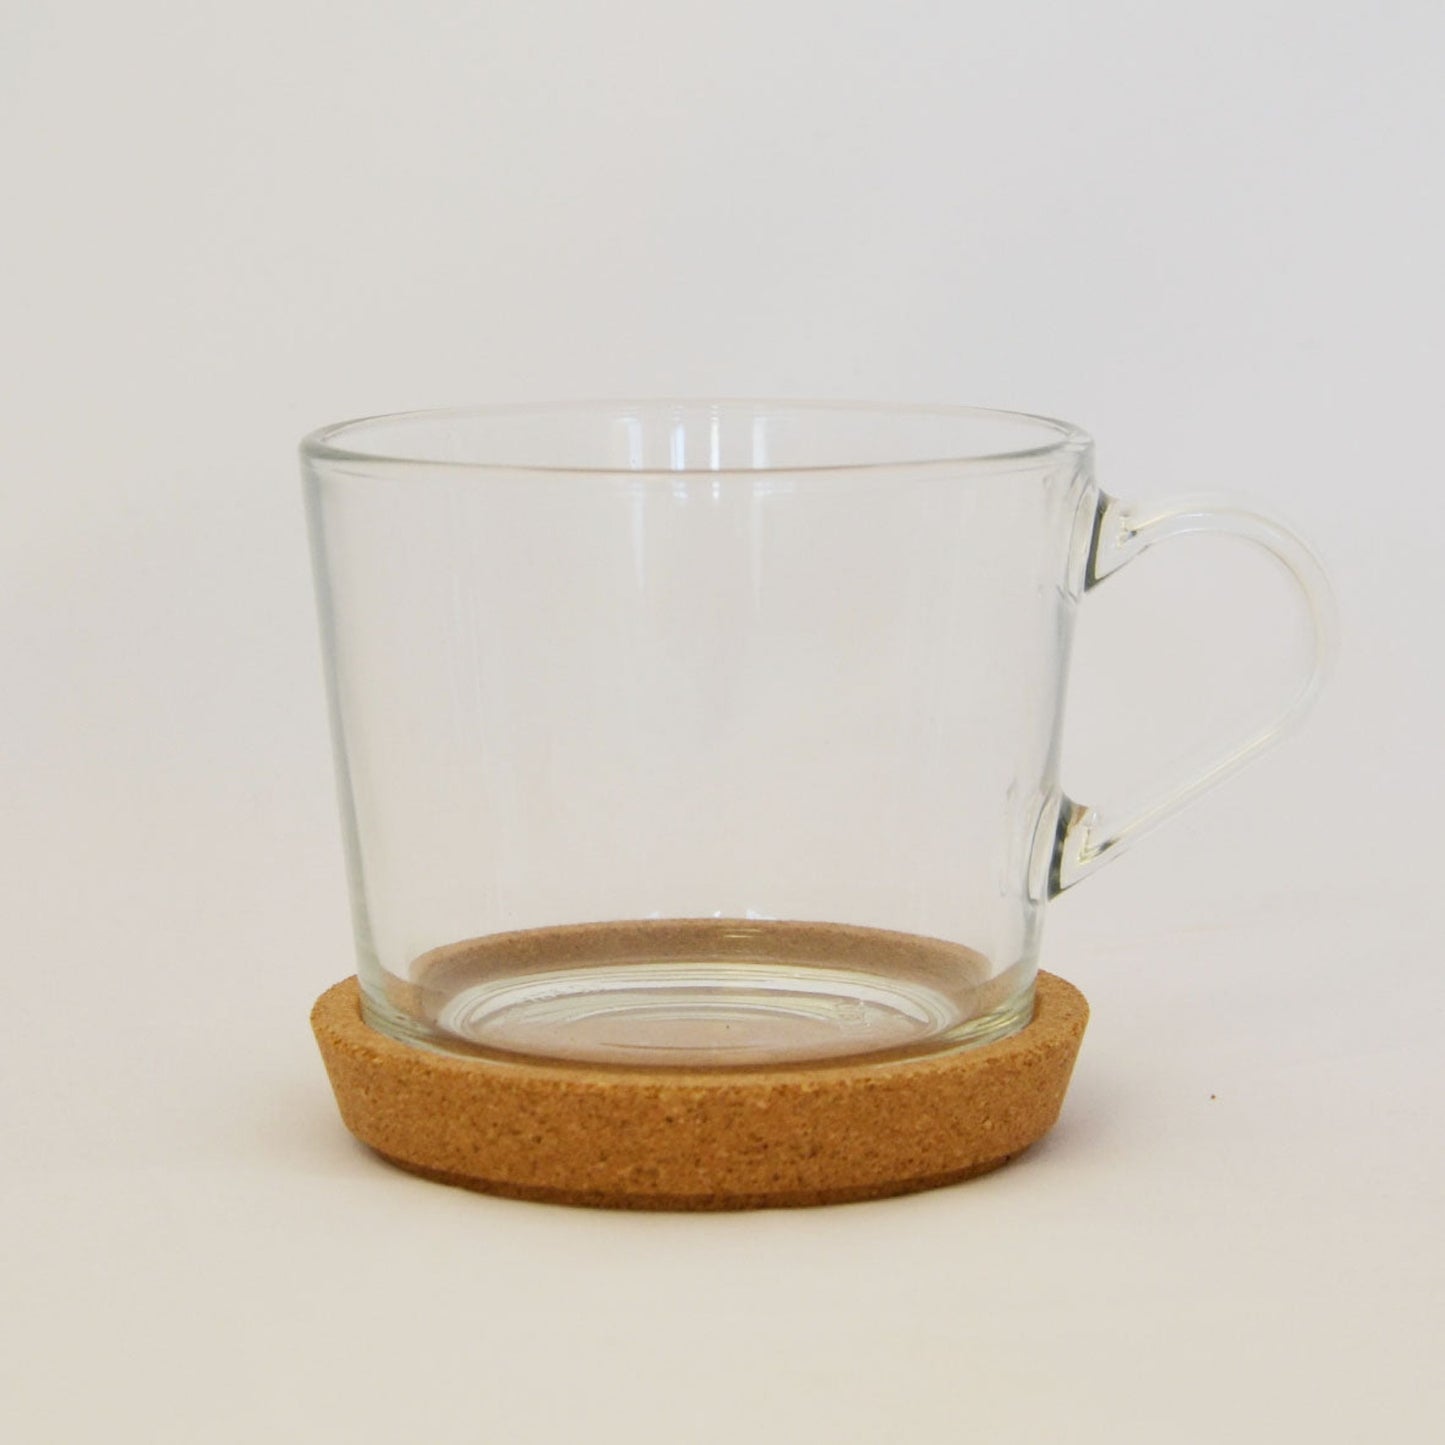 Ikea 365+ Clear Glass Tea Cup With Cork Coaster, 36cl1 (8228219748639)